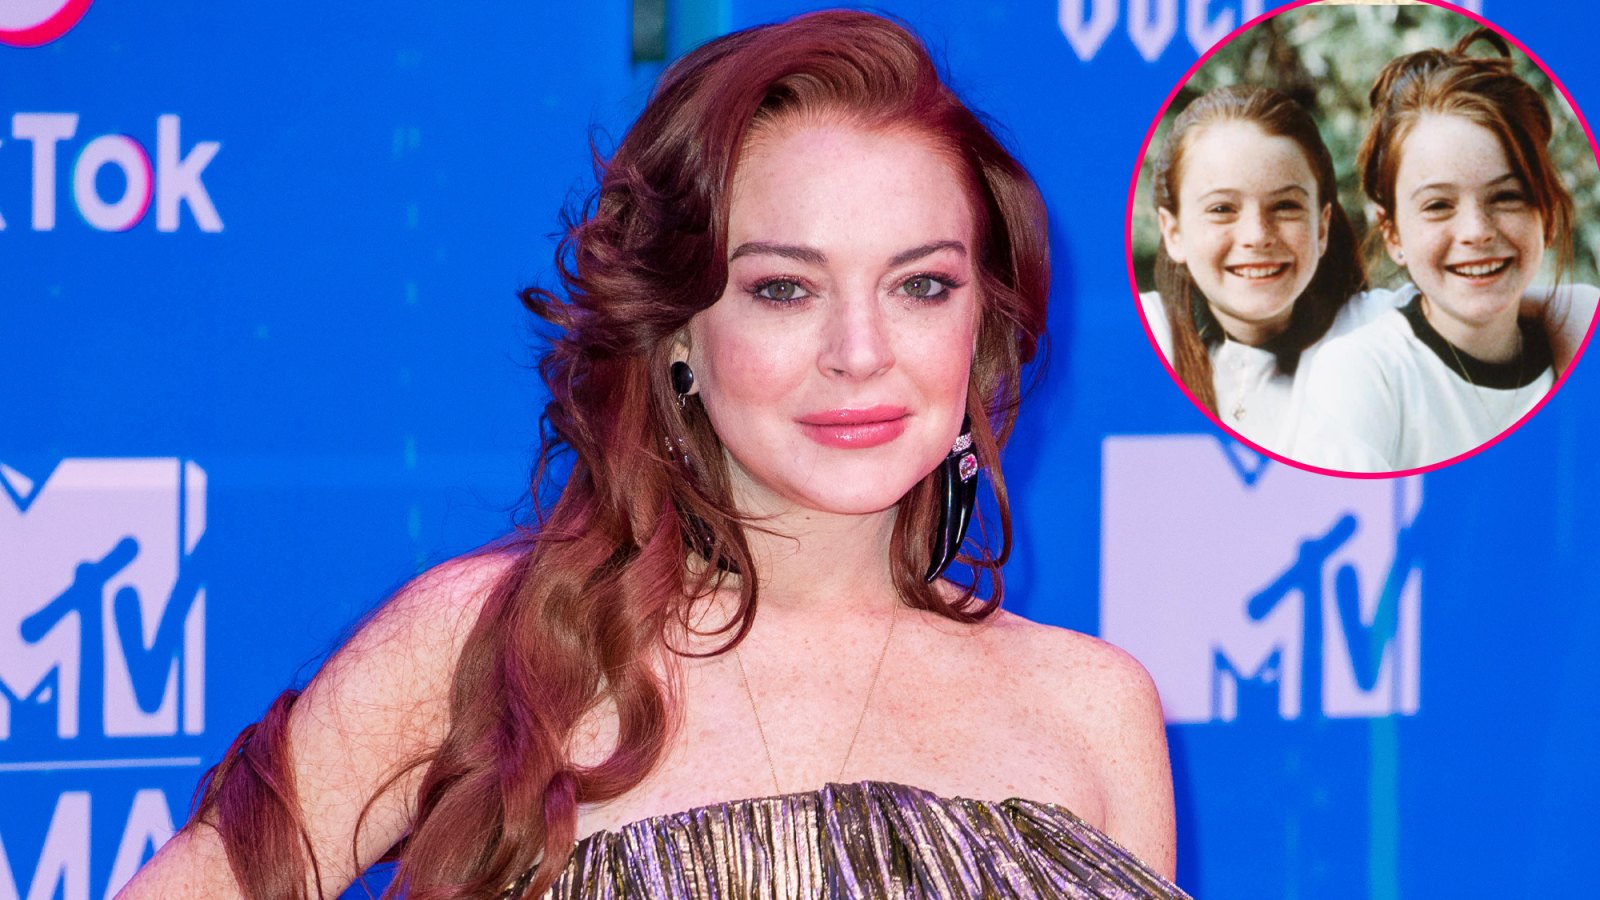 Watch Lindsay Lohan Recreate One of Her Iconic ‘Parent Trap’ Scenes: 'You Heard It Here First'